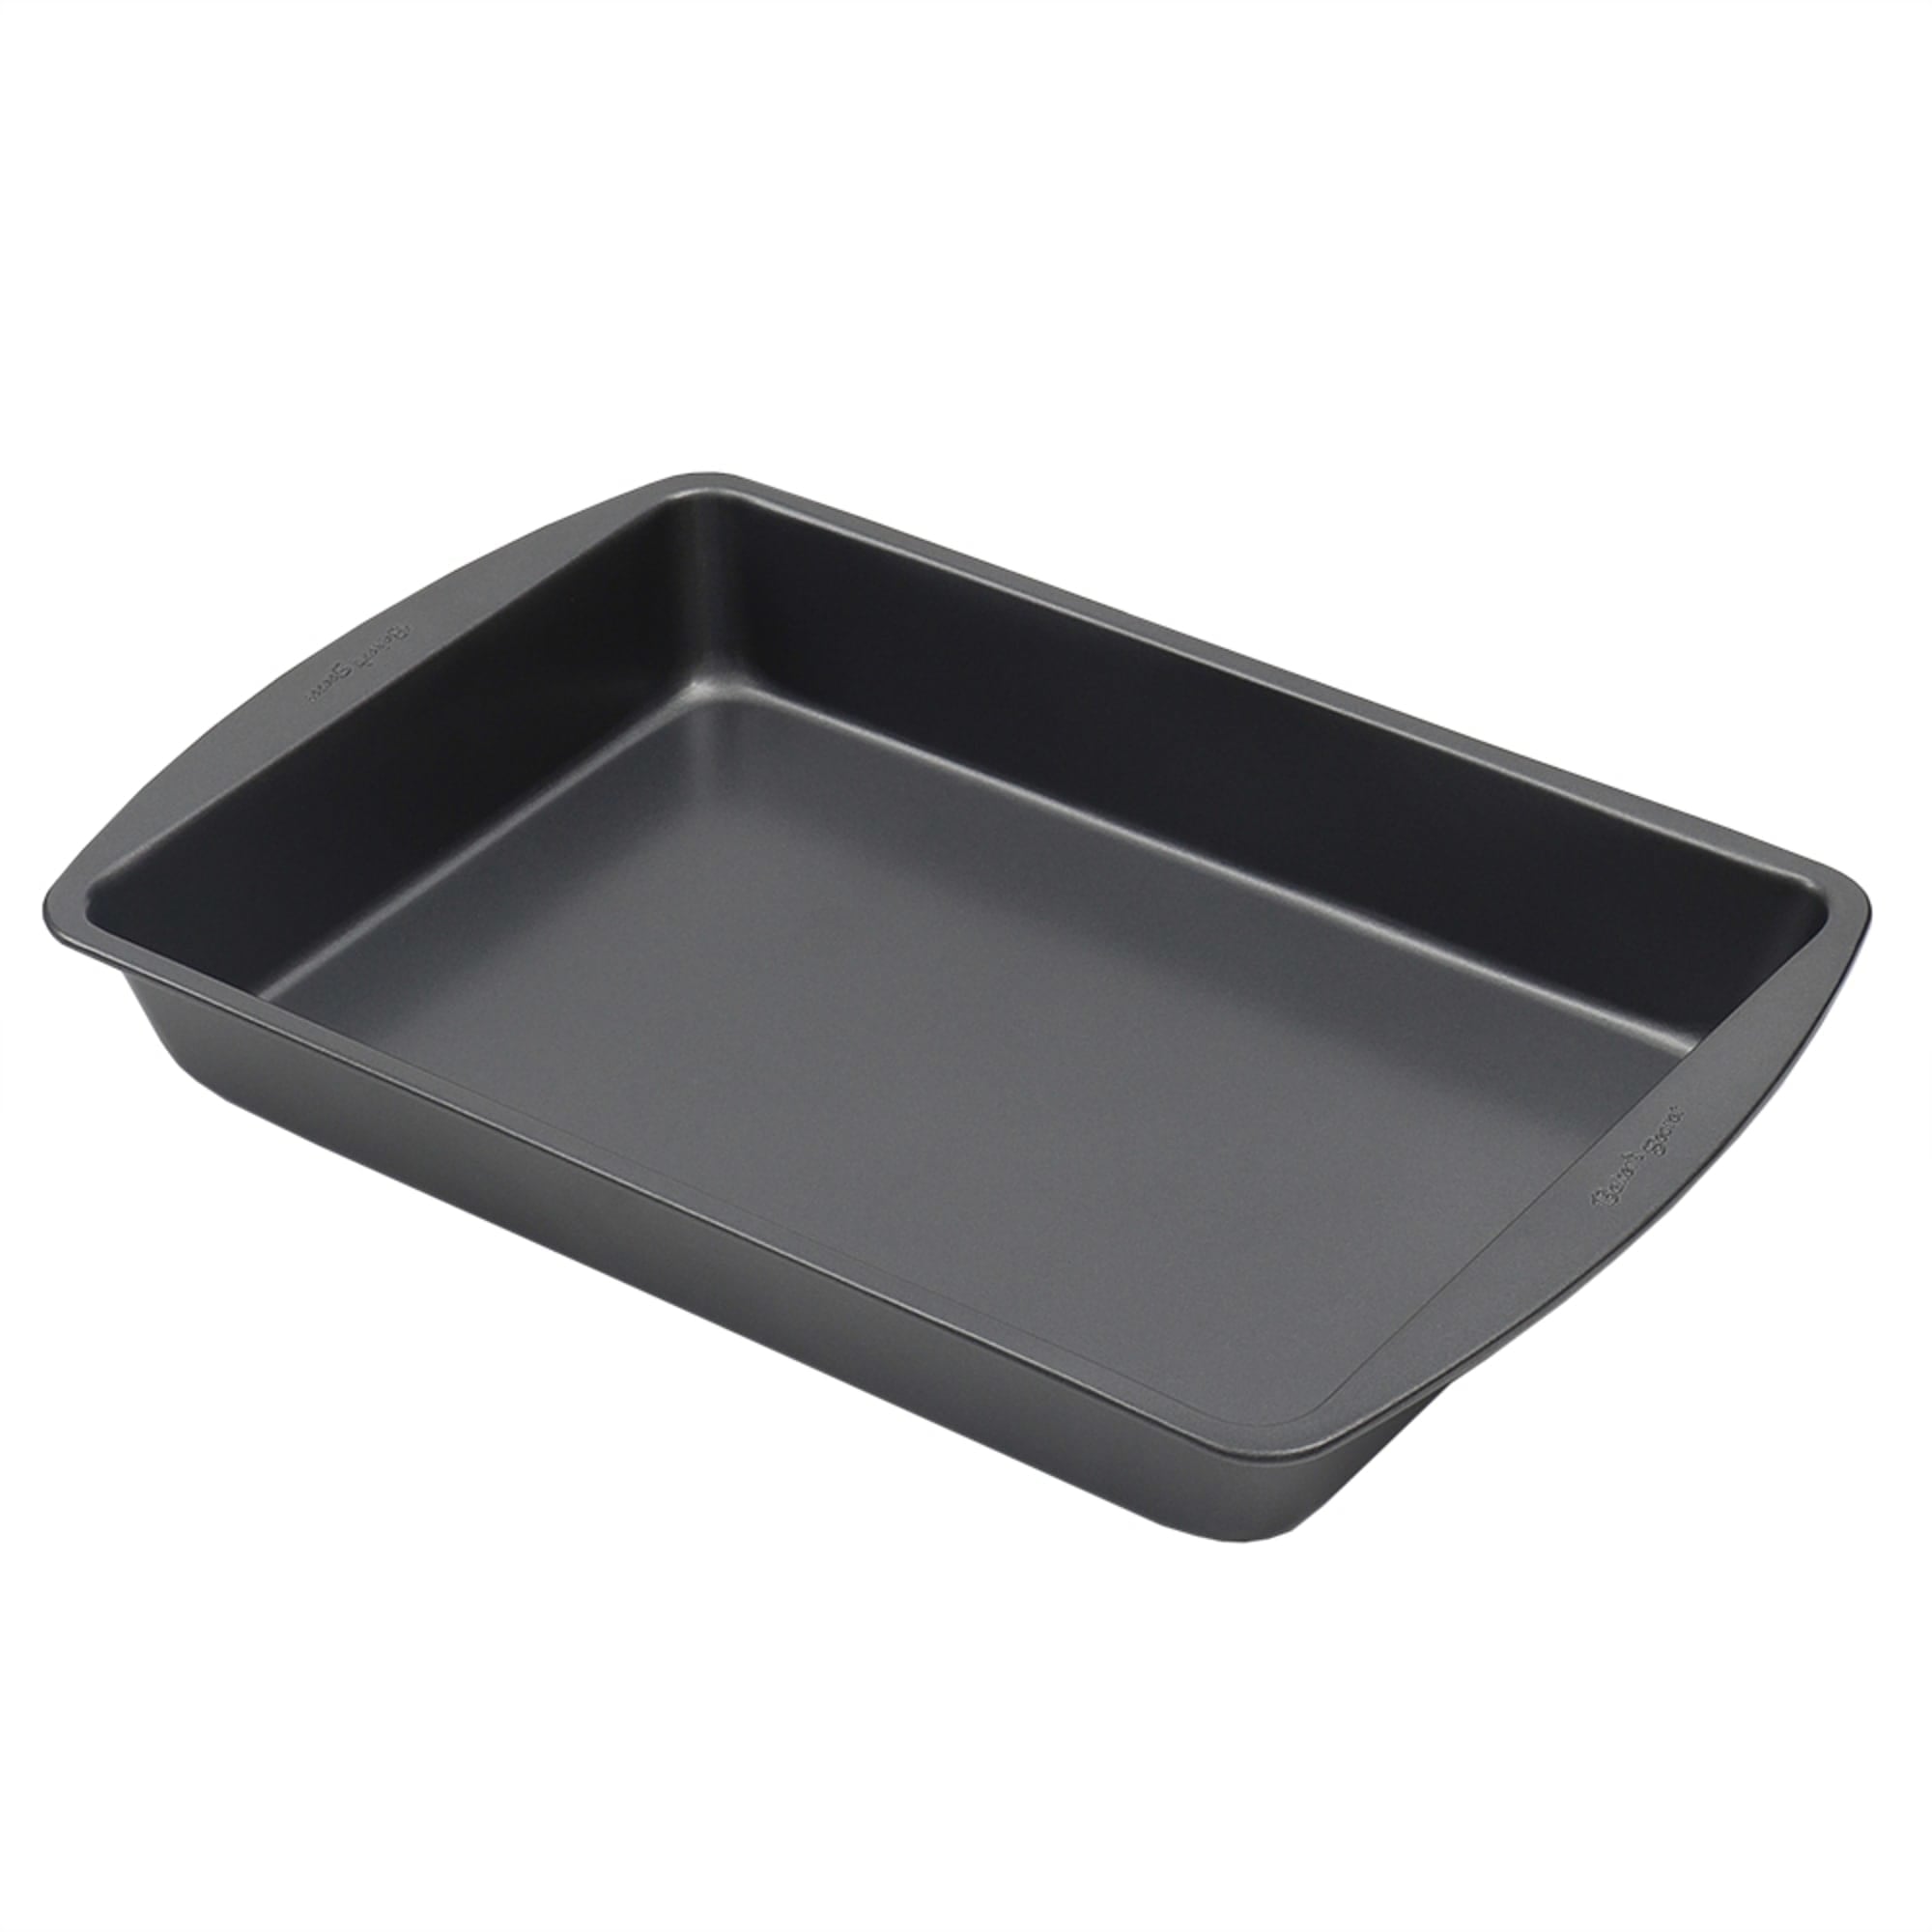 Baker’s Secret Essentials Small 13-inch x 9-inch Non-Stick Steel Roaster Pan $6.00 EACH, CASE PACK OF 12